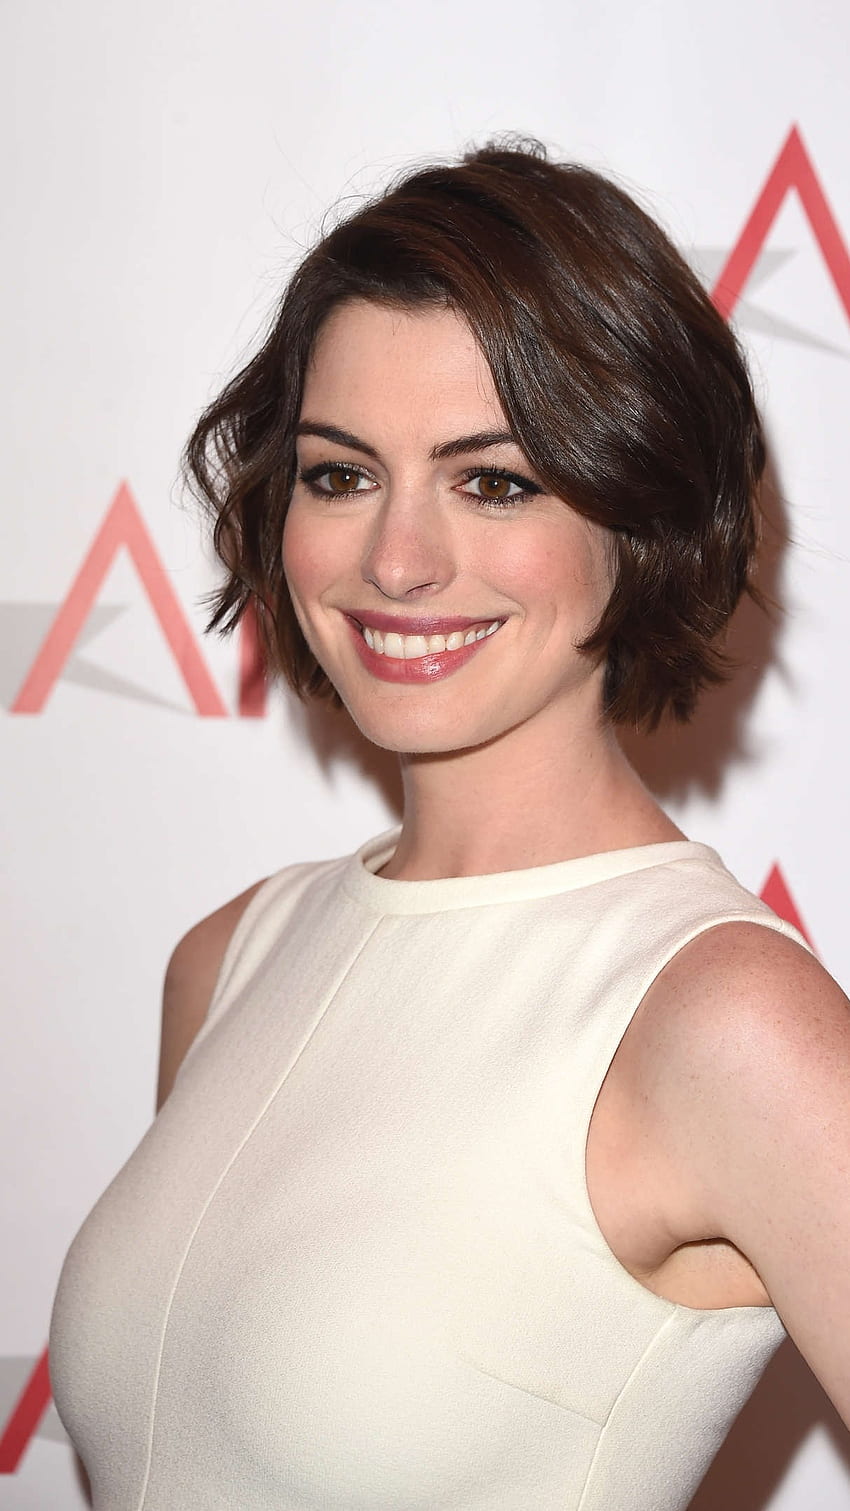 1920x1200 / 1920x1200 anne hathaway wallpaper free hd widescreen -  Coolwallpapers.me!